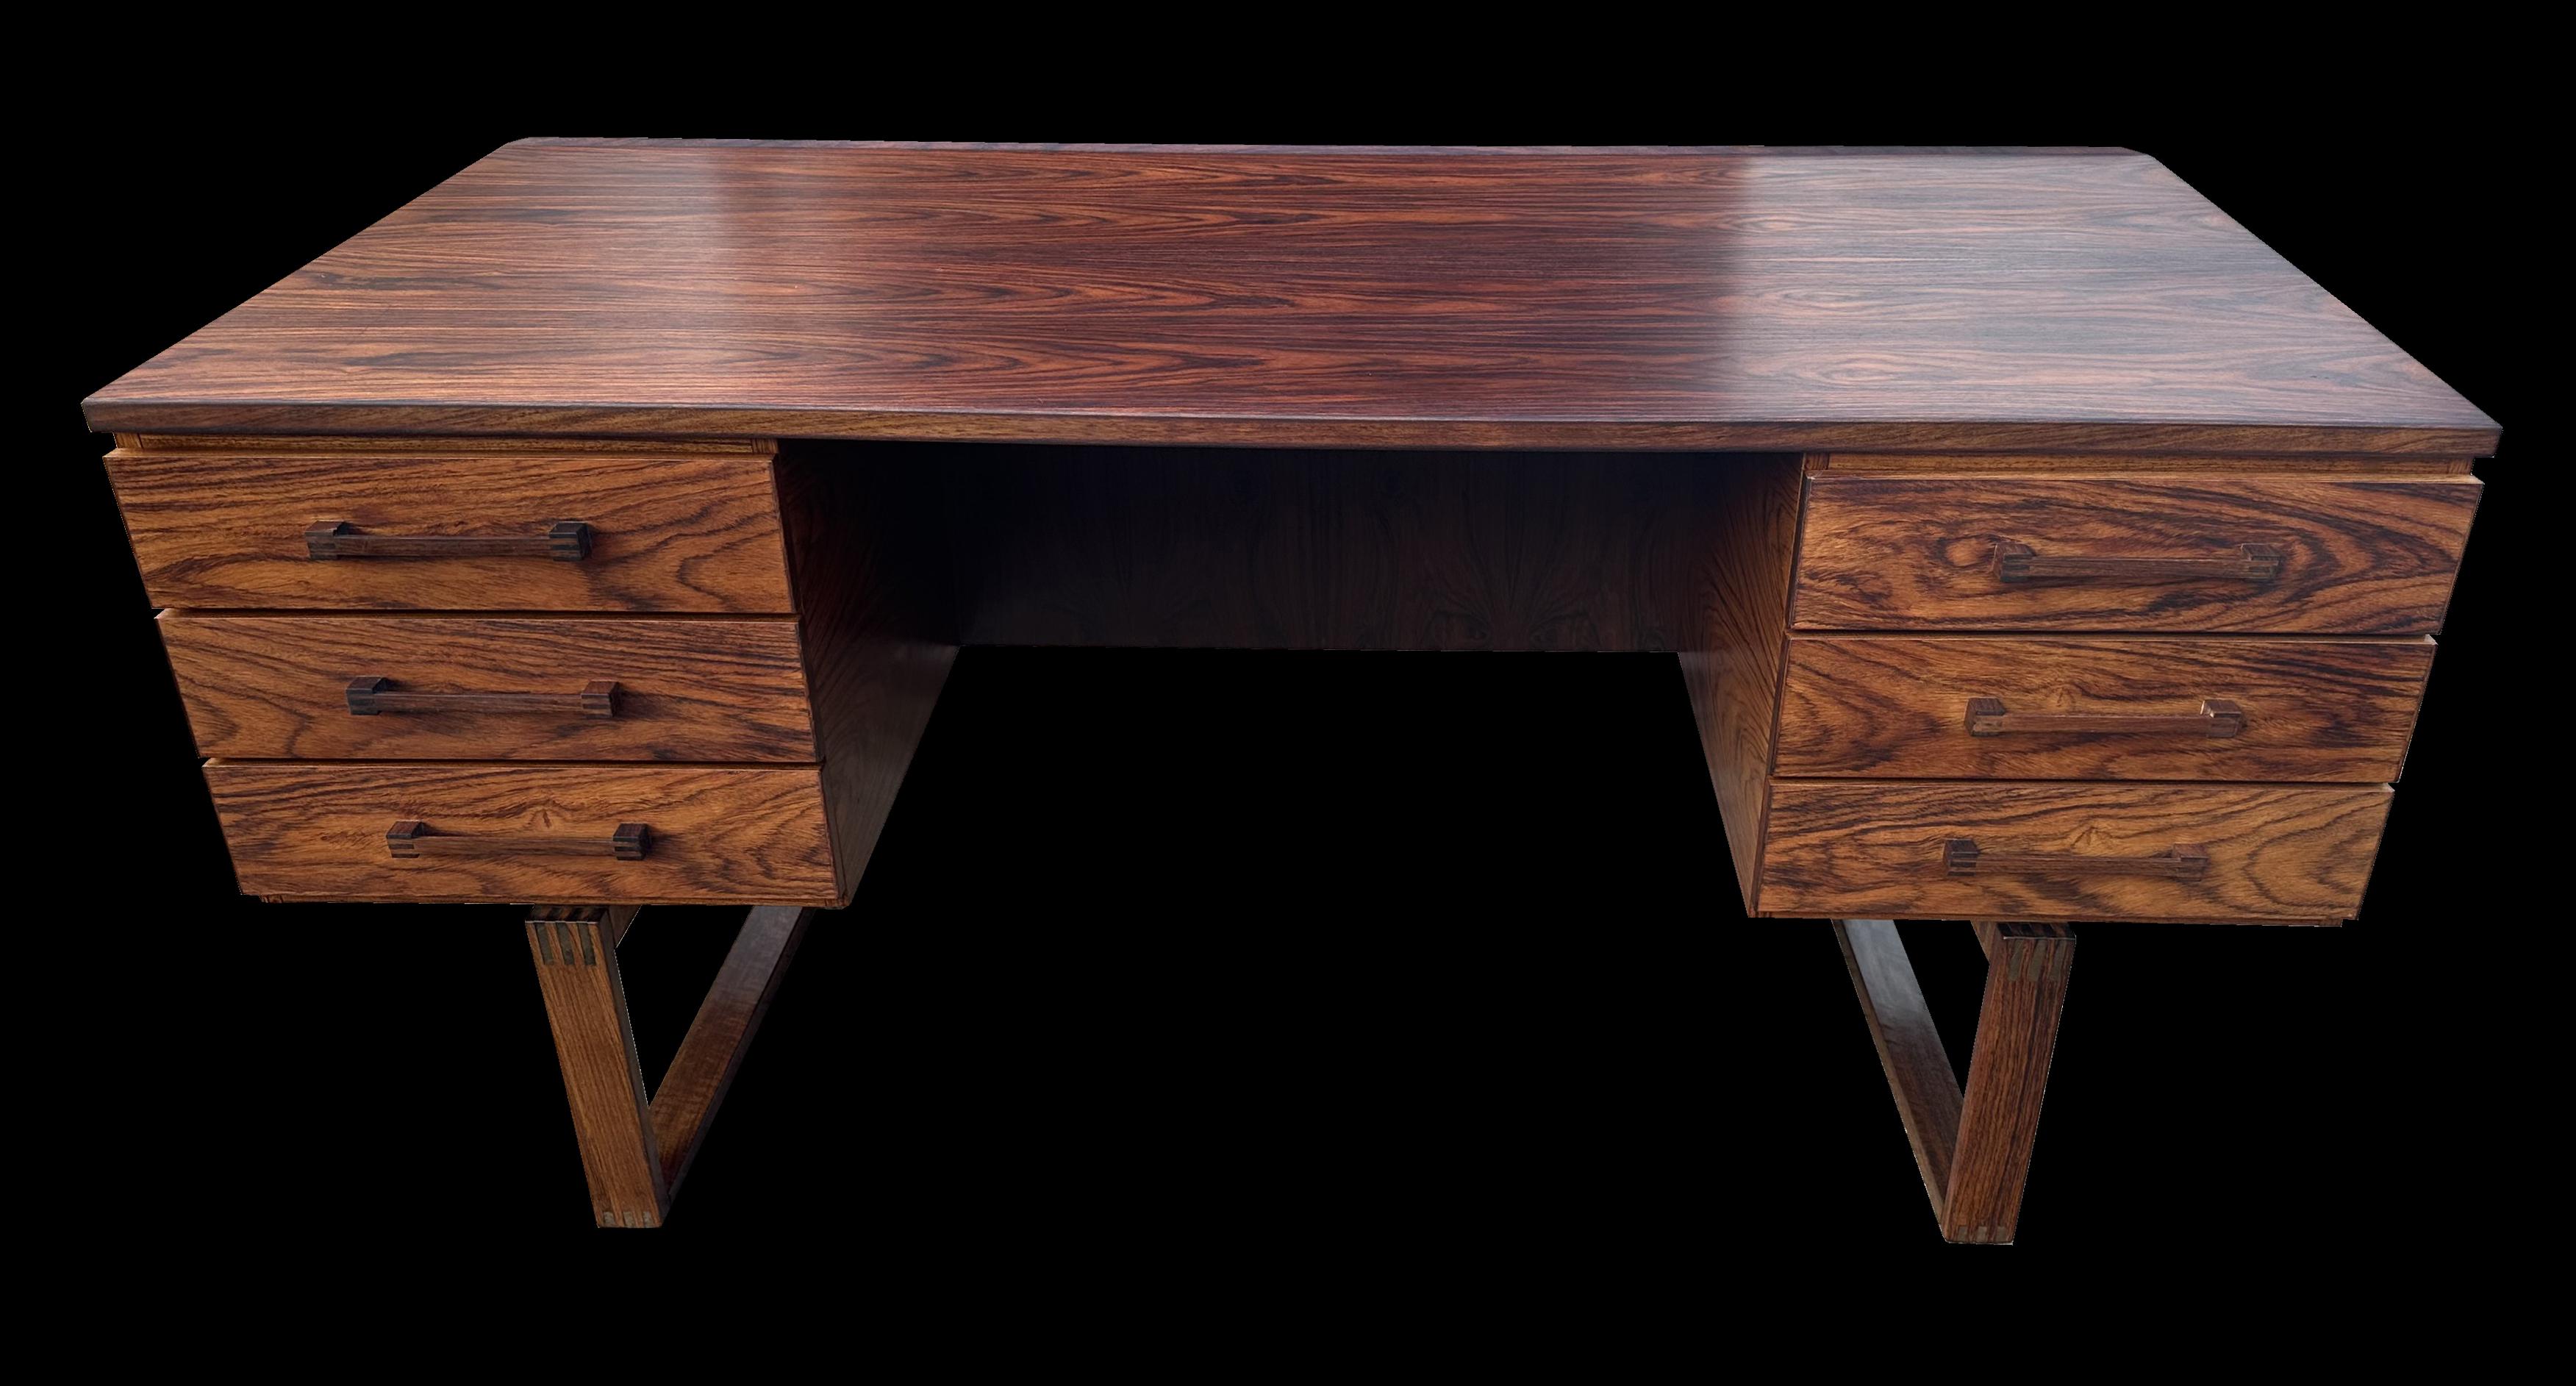 A good example of this very cool and much sought after design, this one is in santos rosewood which does not appear on CITES list of protected species and therefore is no problem to export / import.